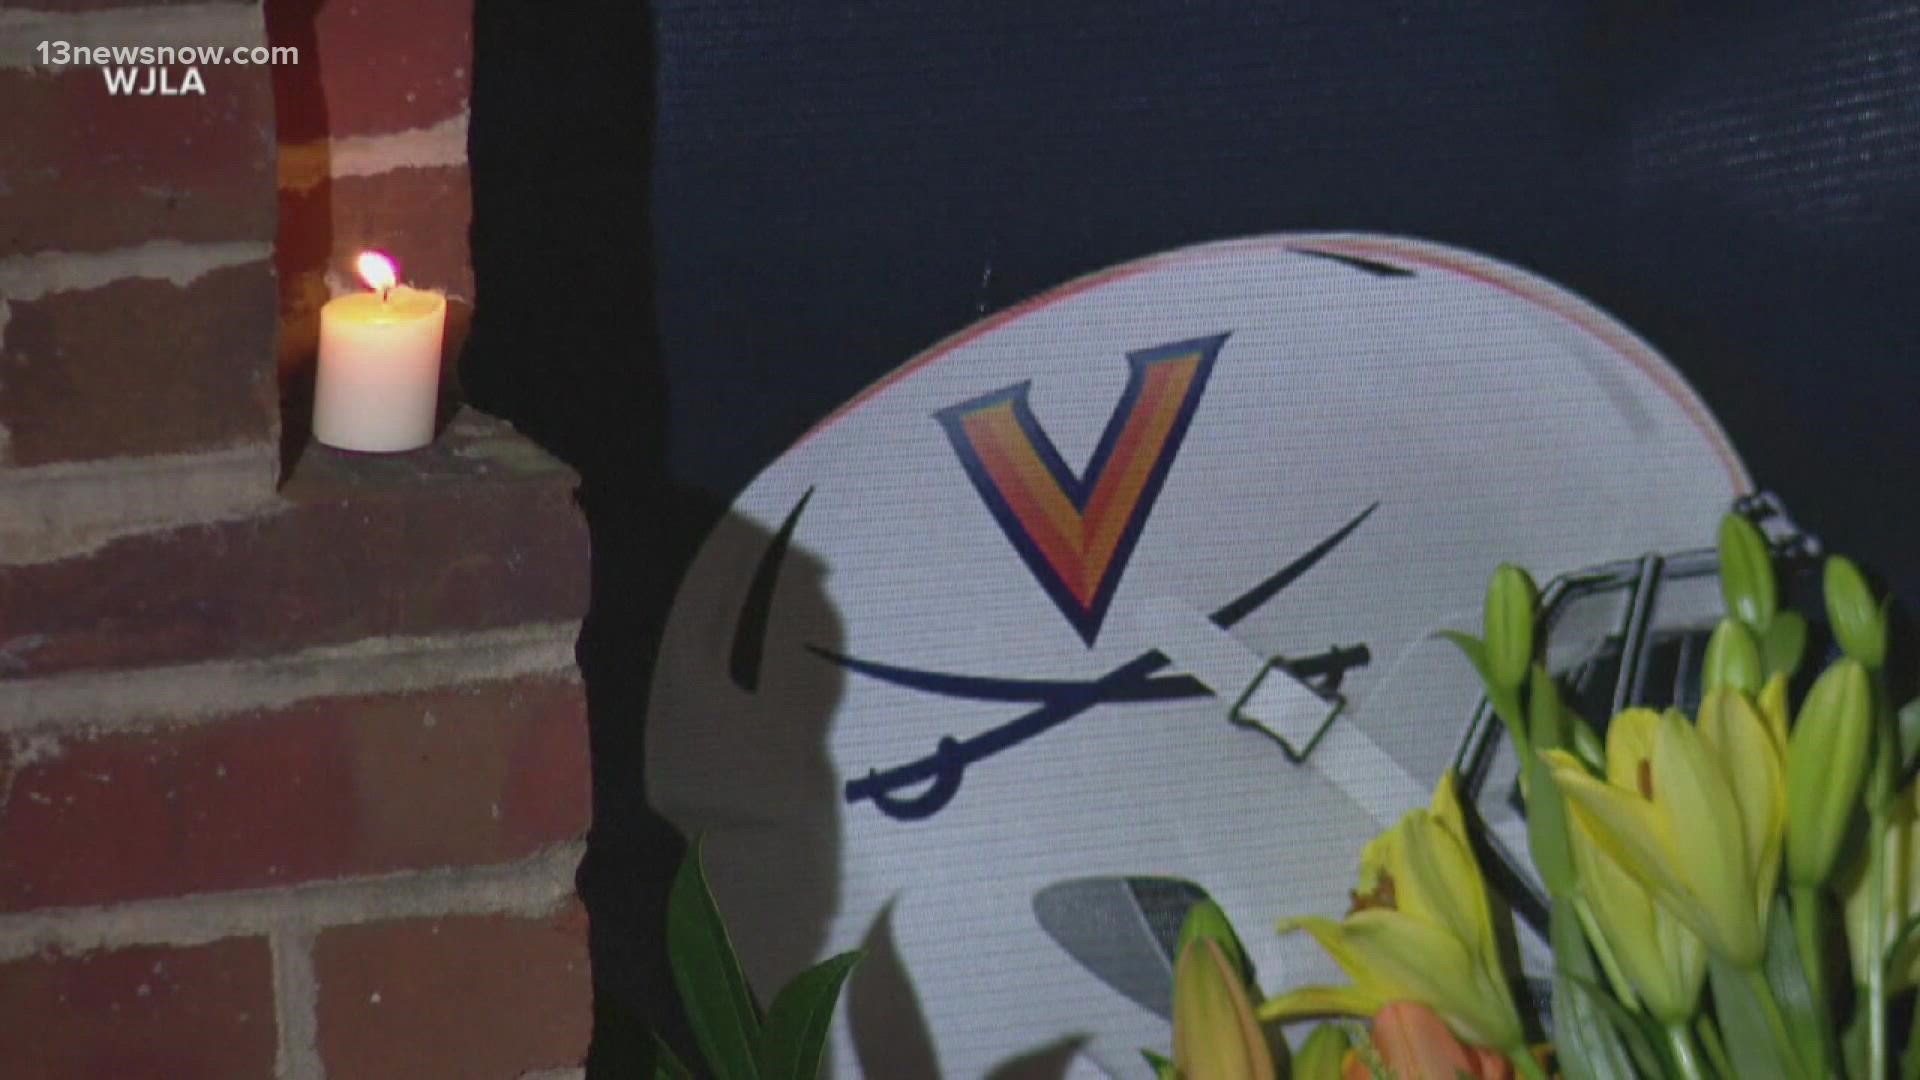 We're continuing our coverage on the aftermath of that deadly shooting on the University of Virginia grounds late Sunday night.